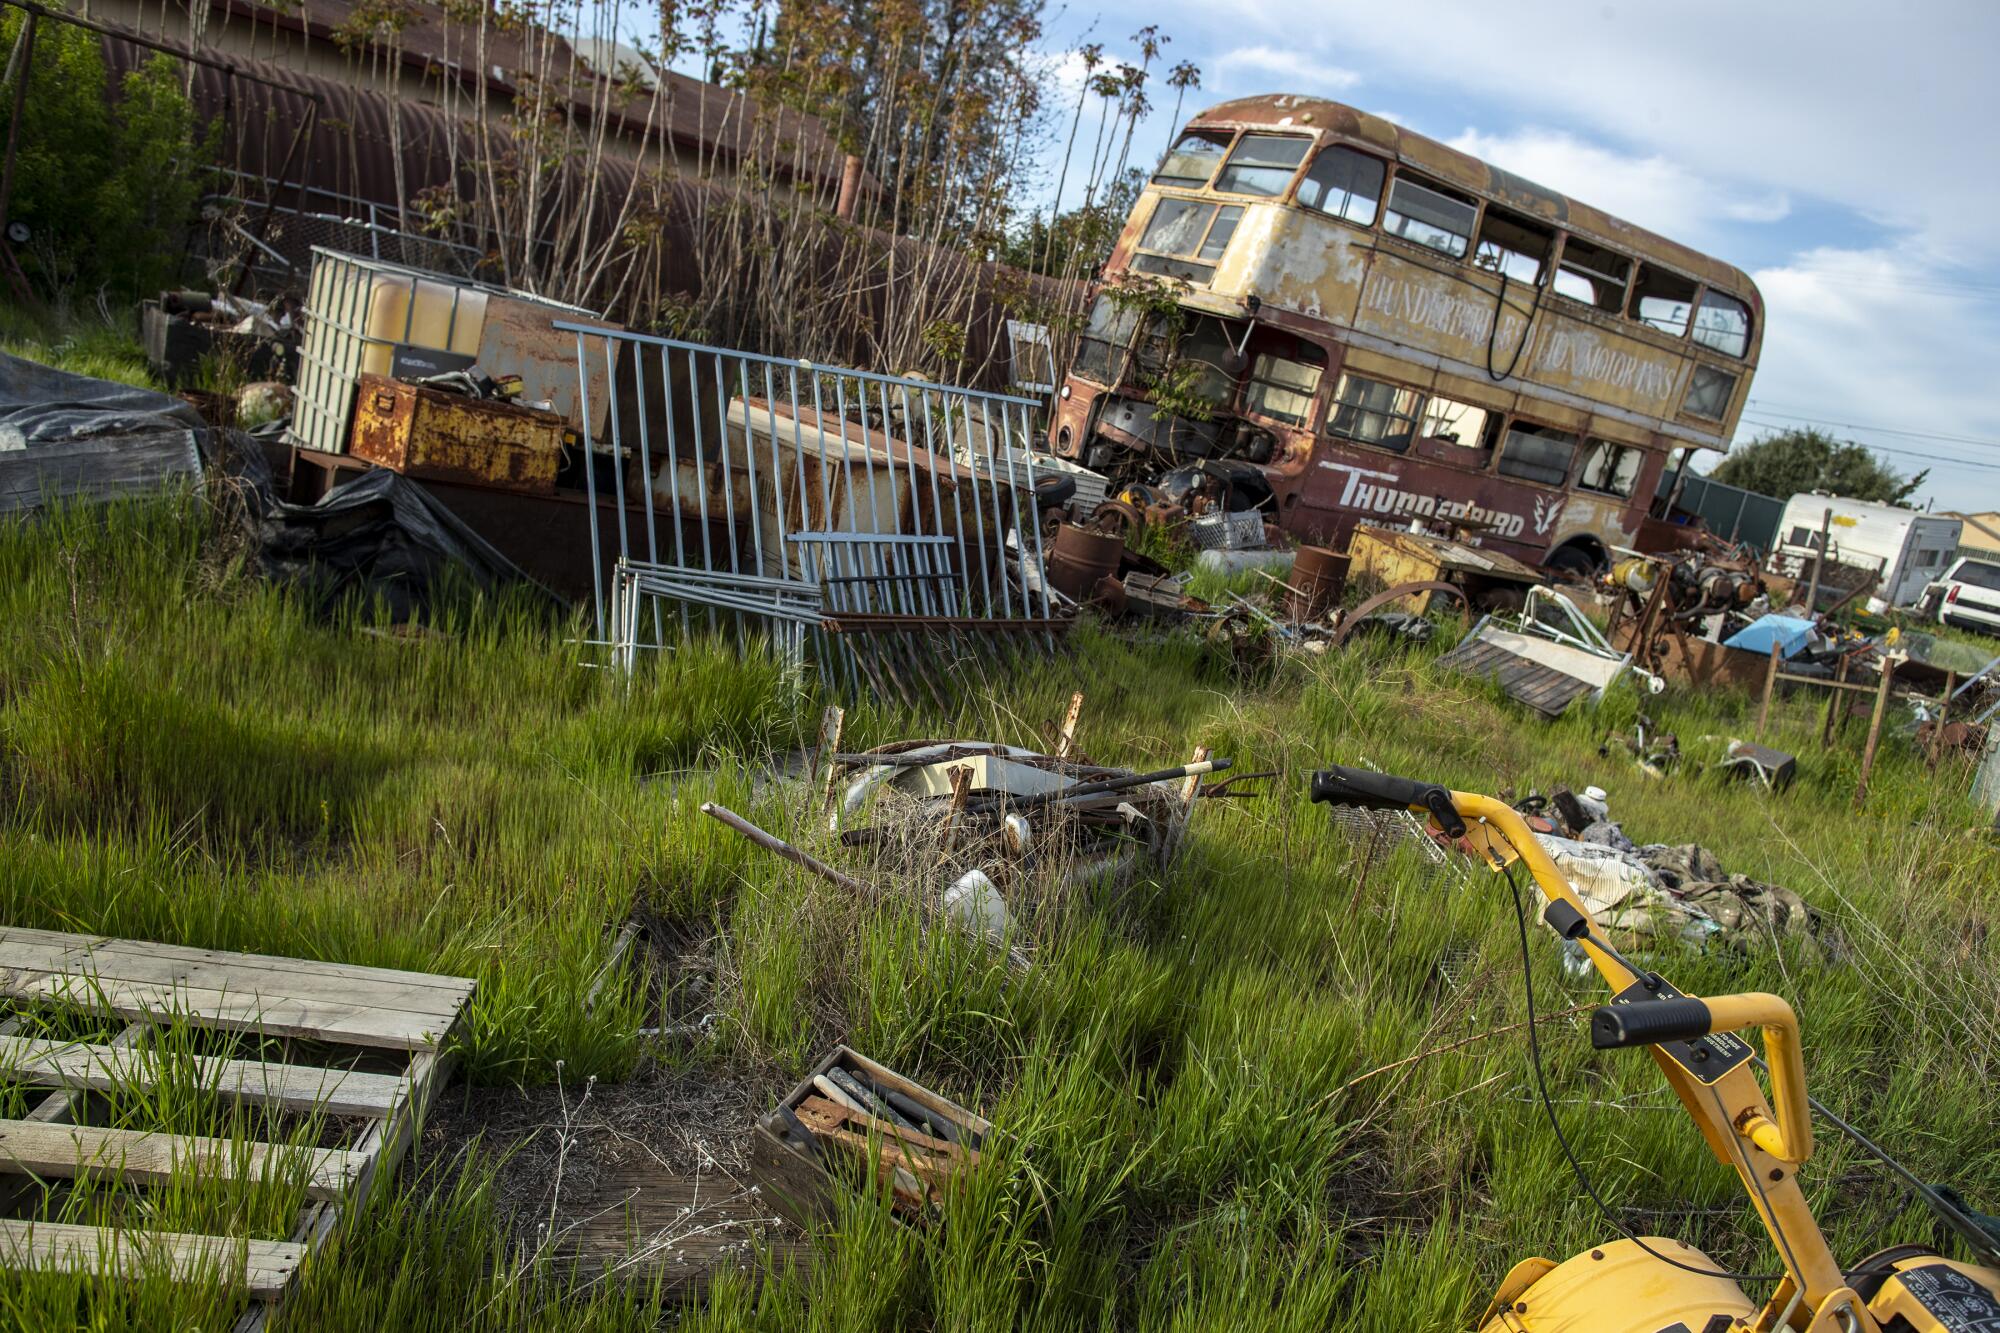 A weedy field strewn with old cars, junk and antiques.